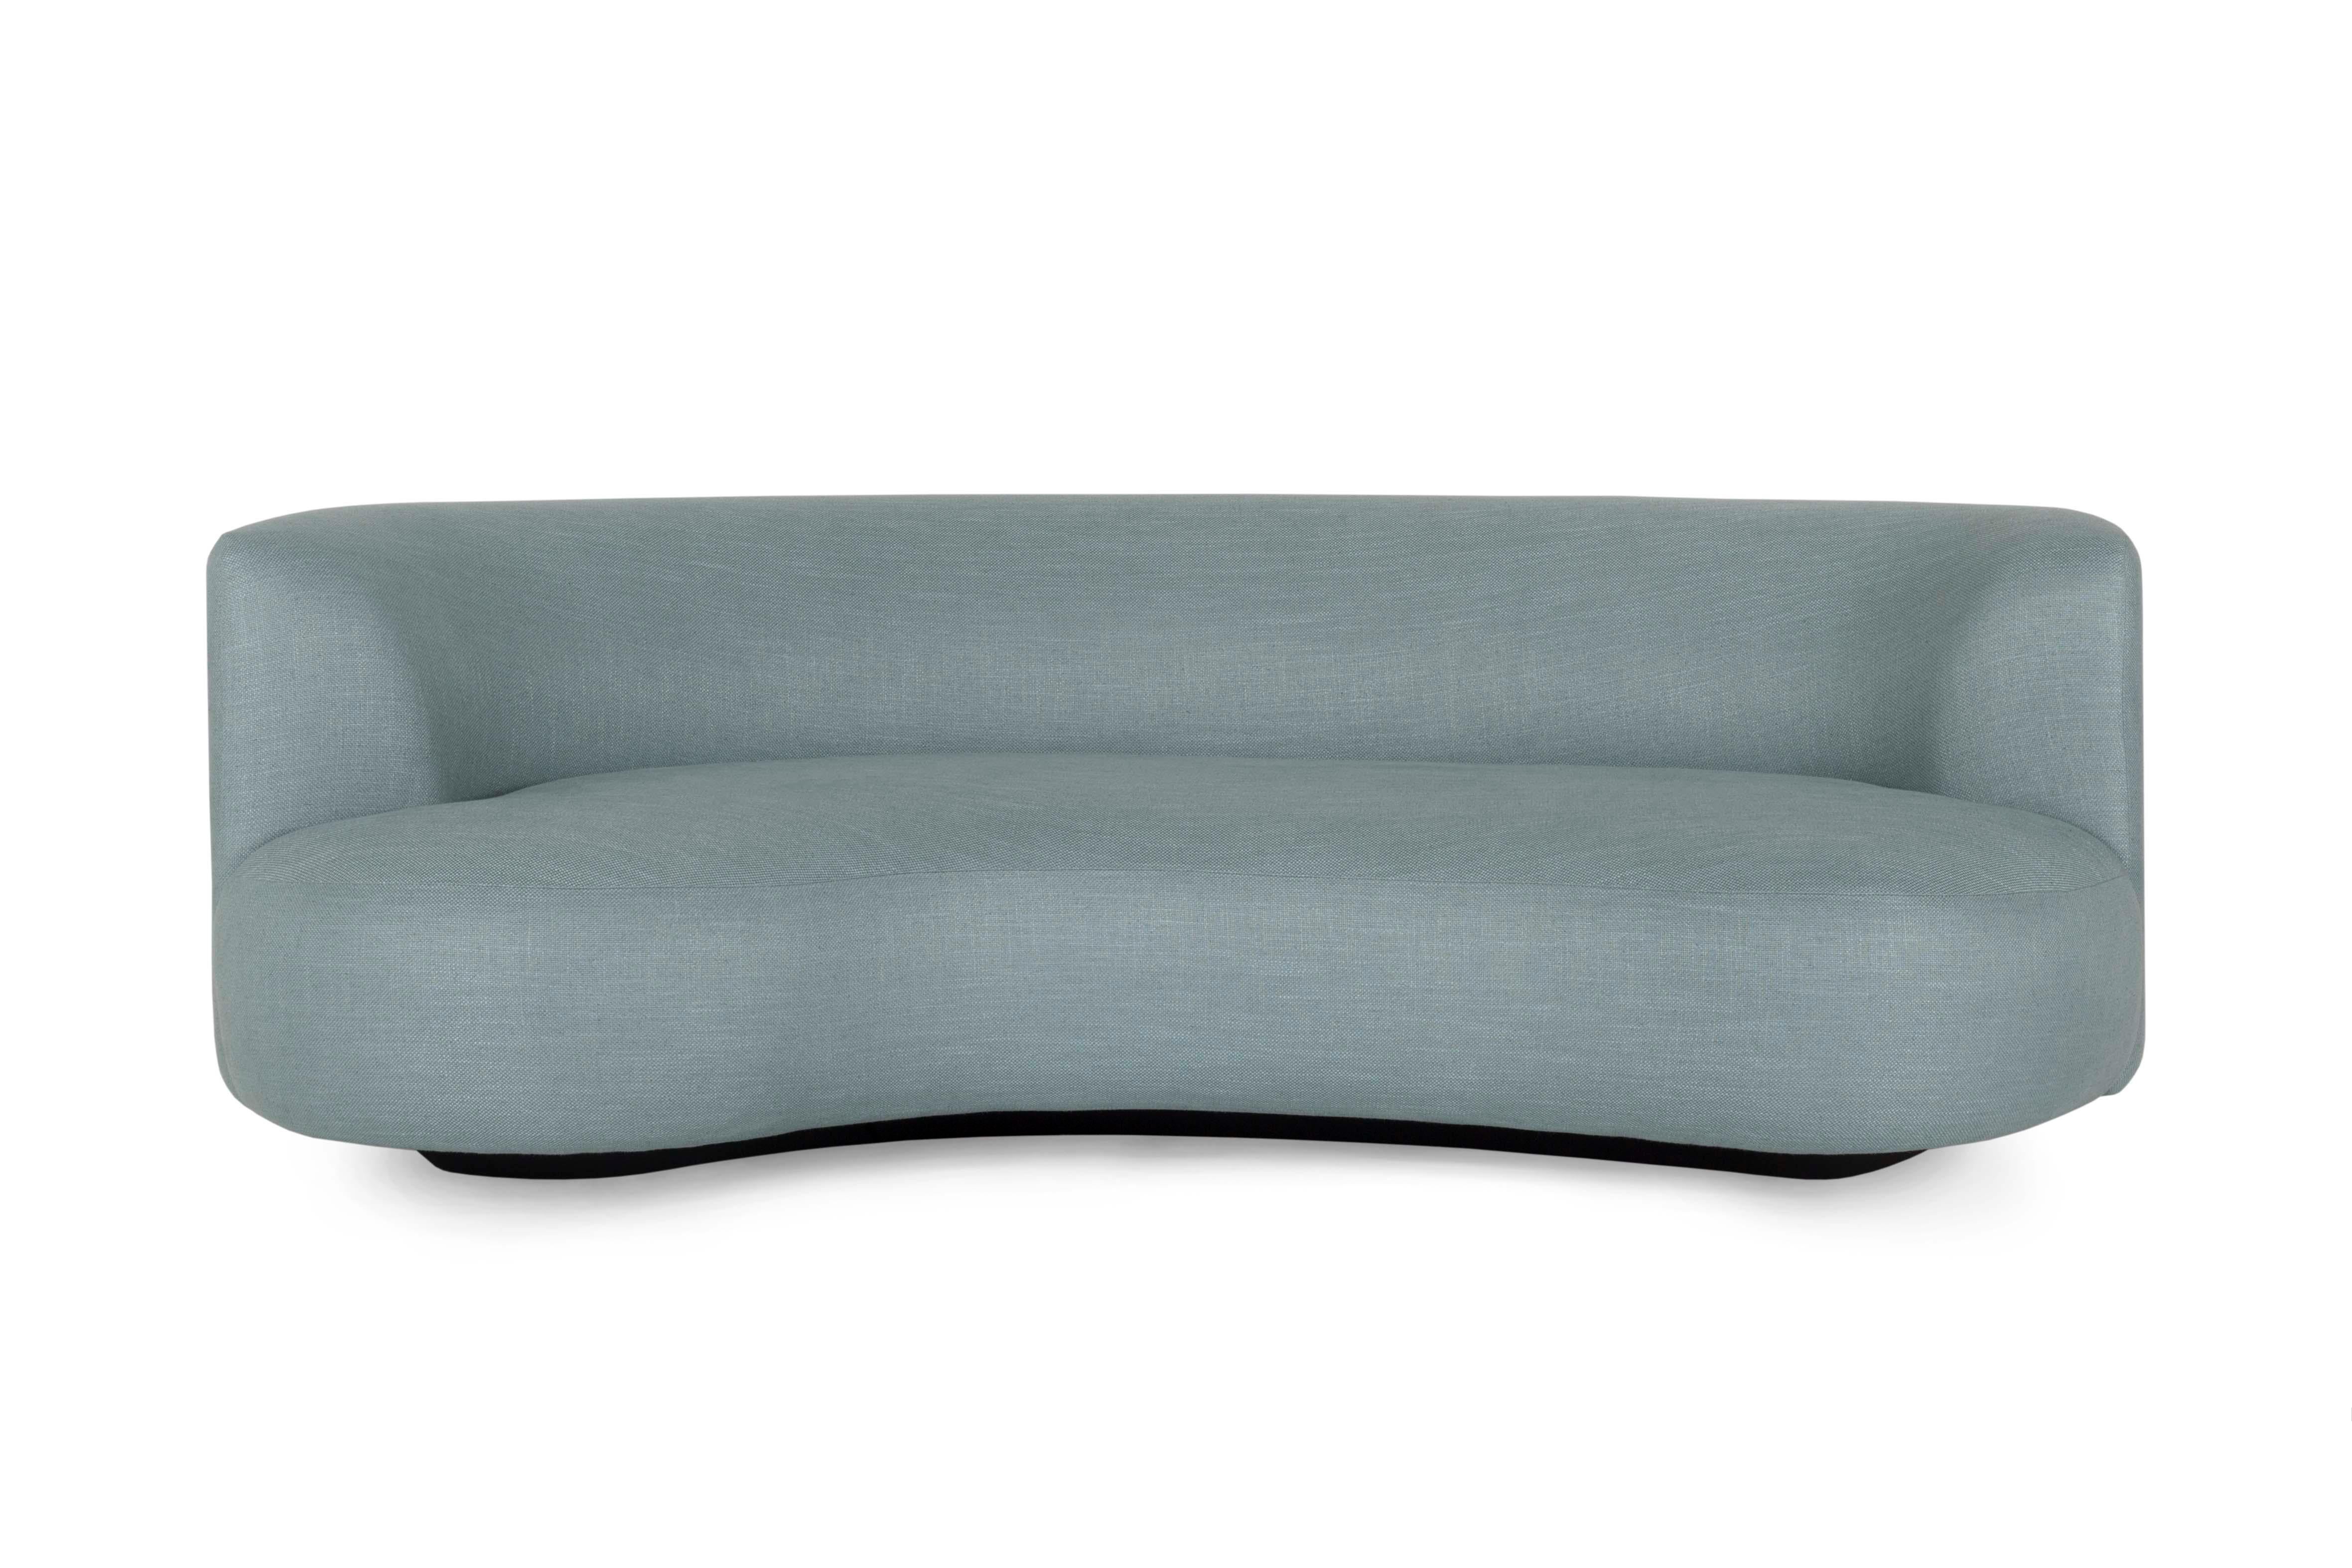 Twins Sofa Outdoors, Contemporary Collection, Handcrafted in Portugal - Europe by Greenapple.

Designed by Rute Martins for the Contemporary Collection, the Twins outdoors sofa and day bed share the same genes, yet each possesses a distinct design,